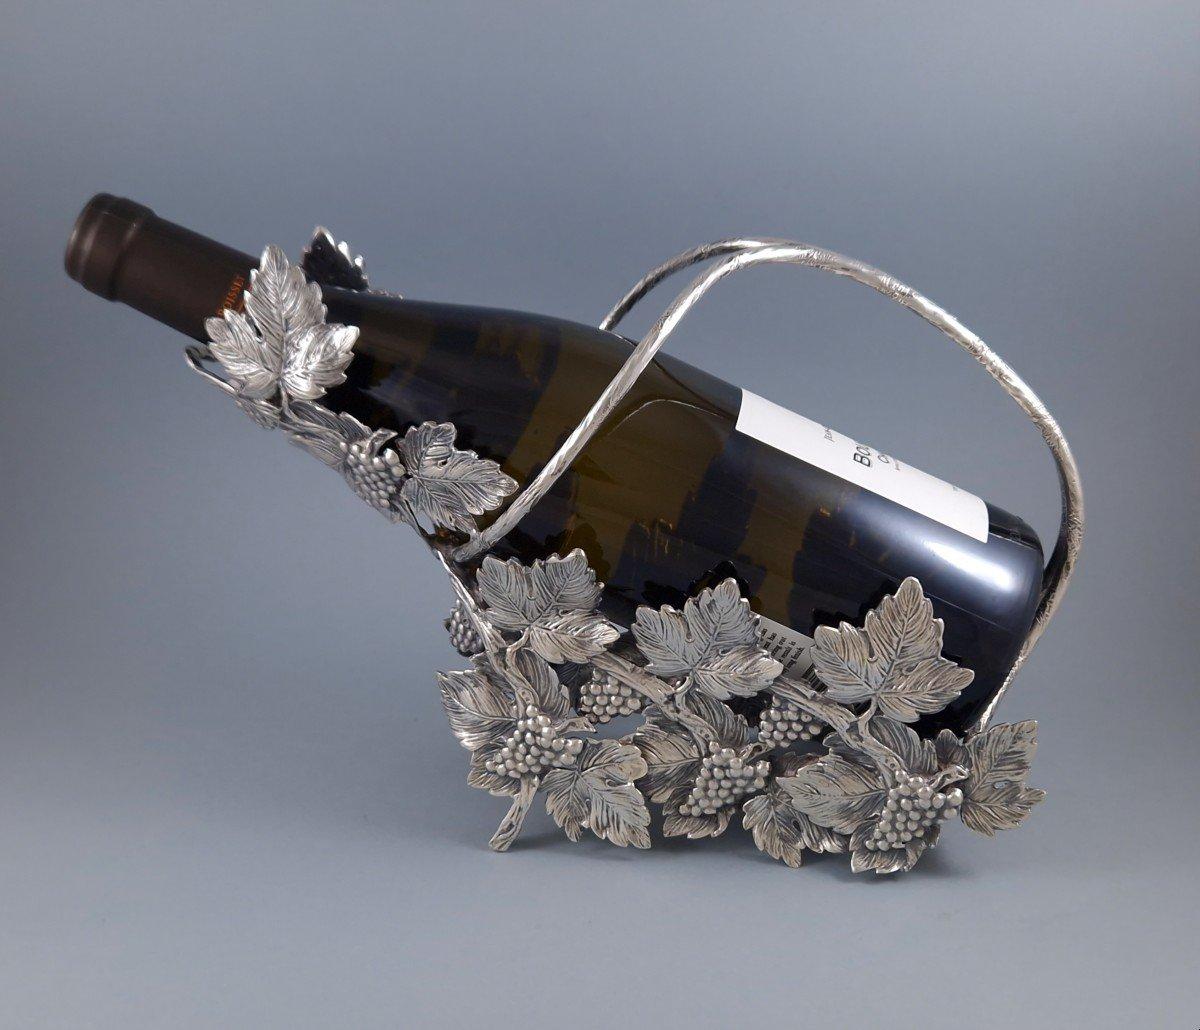 Rare and very beautiful Sterling Silver wine bottle holder 
Finely decorated with leaves, bunches of grapes and branches 

Silver hallmark 800 
Silversmith: Gabriele deVechi 
Length: 28 cm 
Width: 10 cm 
Height: 18.4 cm 
Weight: 756 grams

In very